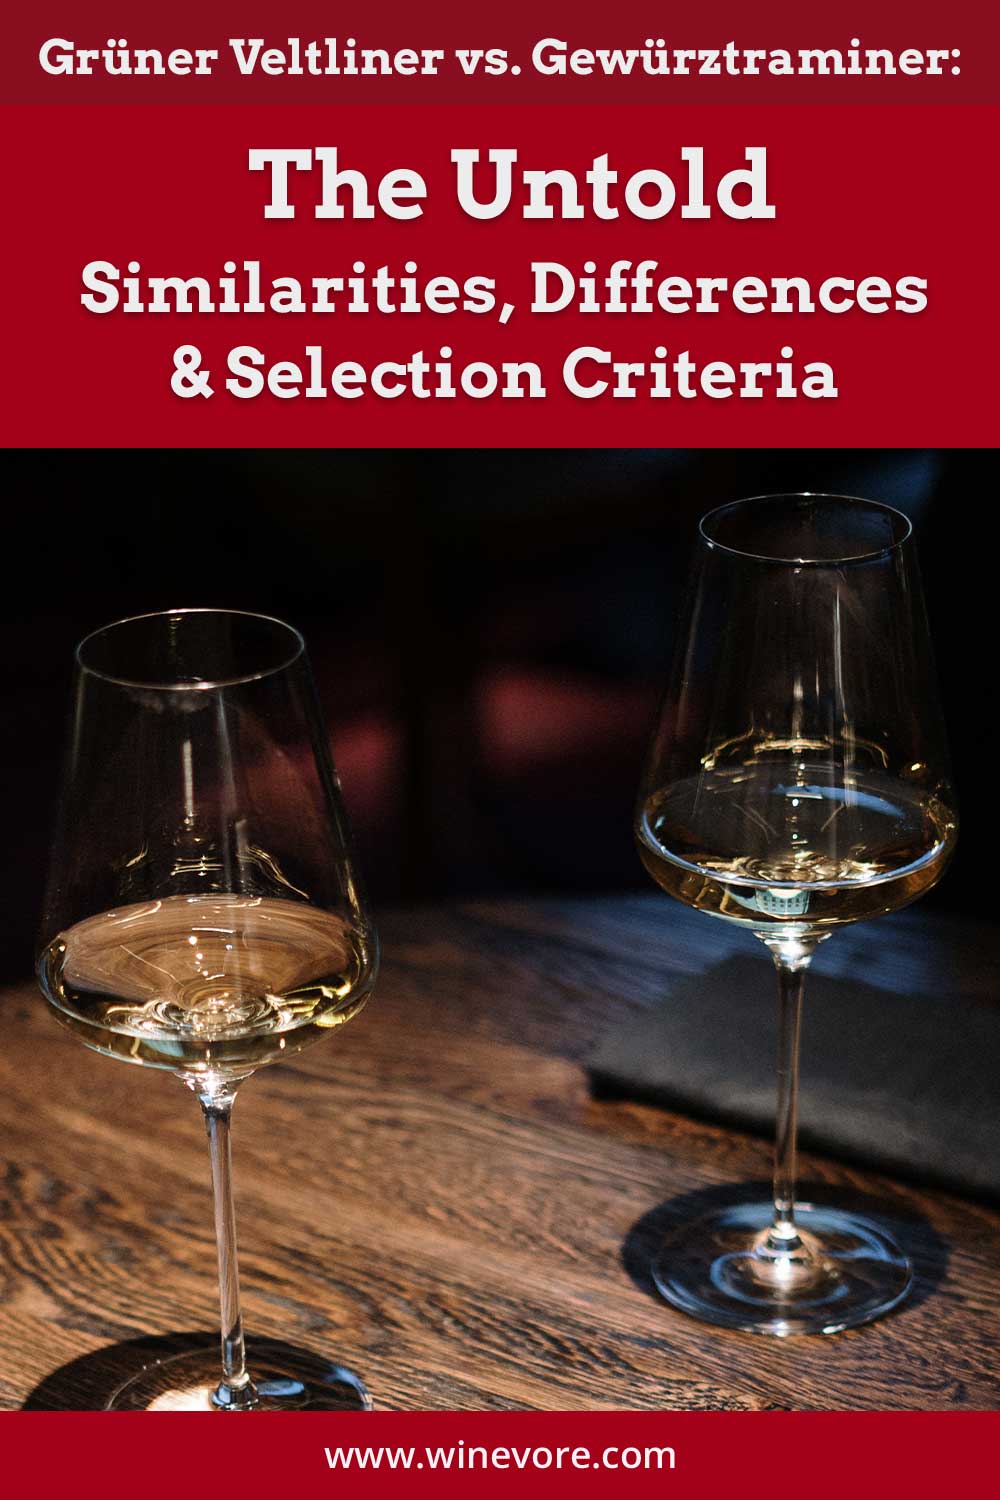 Two wine glasses on a wooden table - Grüner Veltliner vs. Gewürztraminer: The Similarities, Differences & Selection Criteria